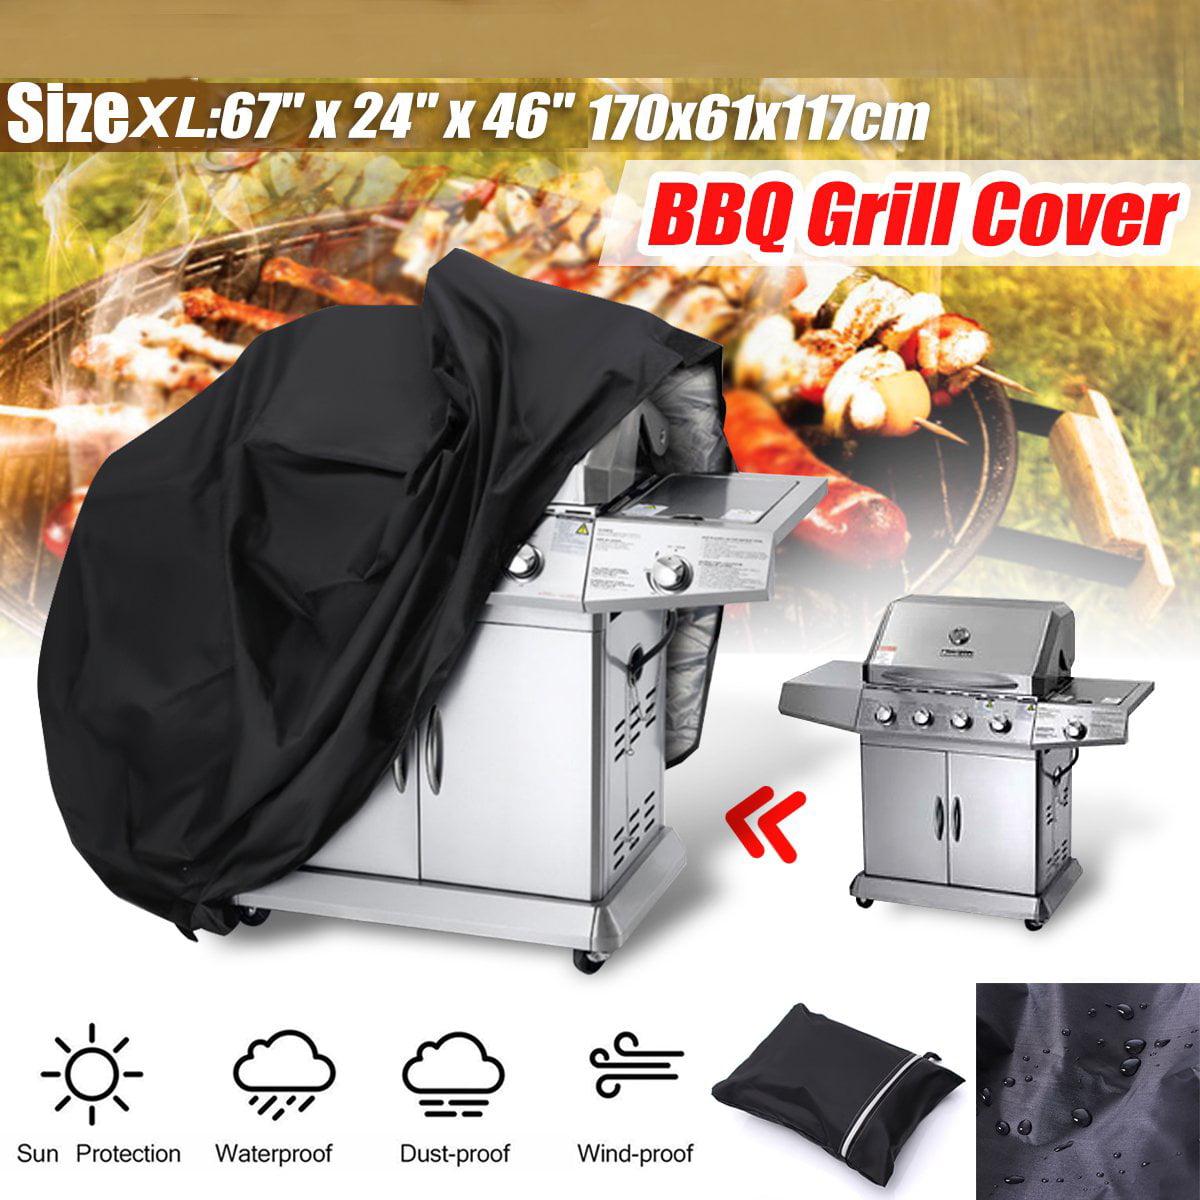 34 Inch Patio BBQ Cover Small Waterproof Outdoor Garden Barbecue  Grill Protecto 